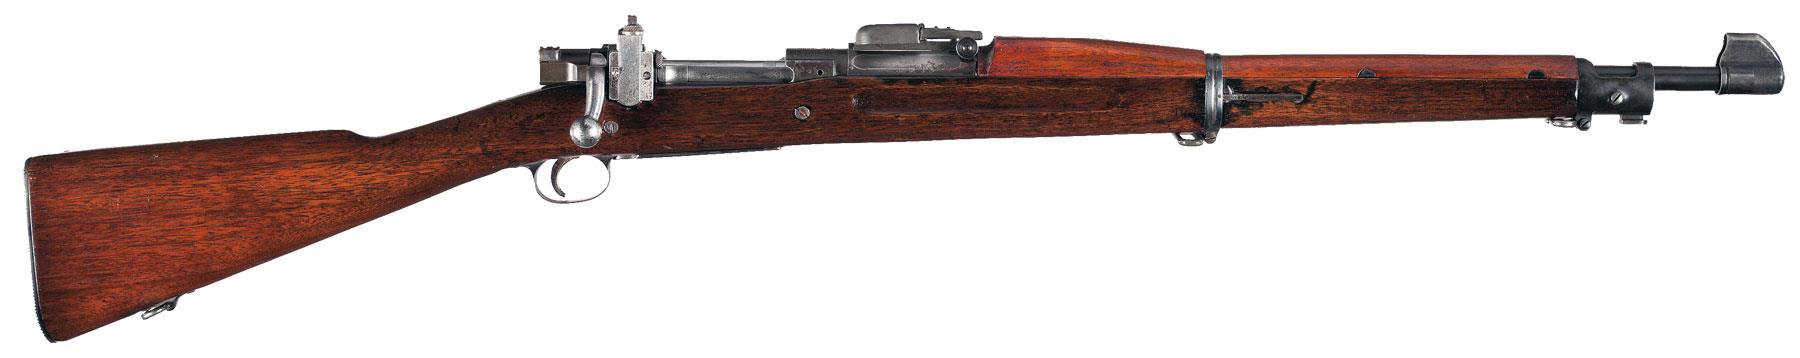 national ordinance 1903a3 serial numbers